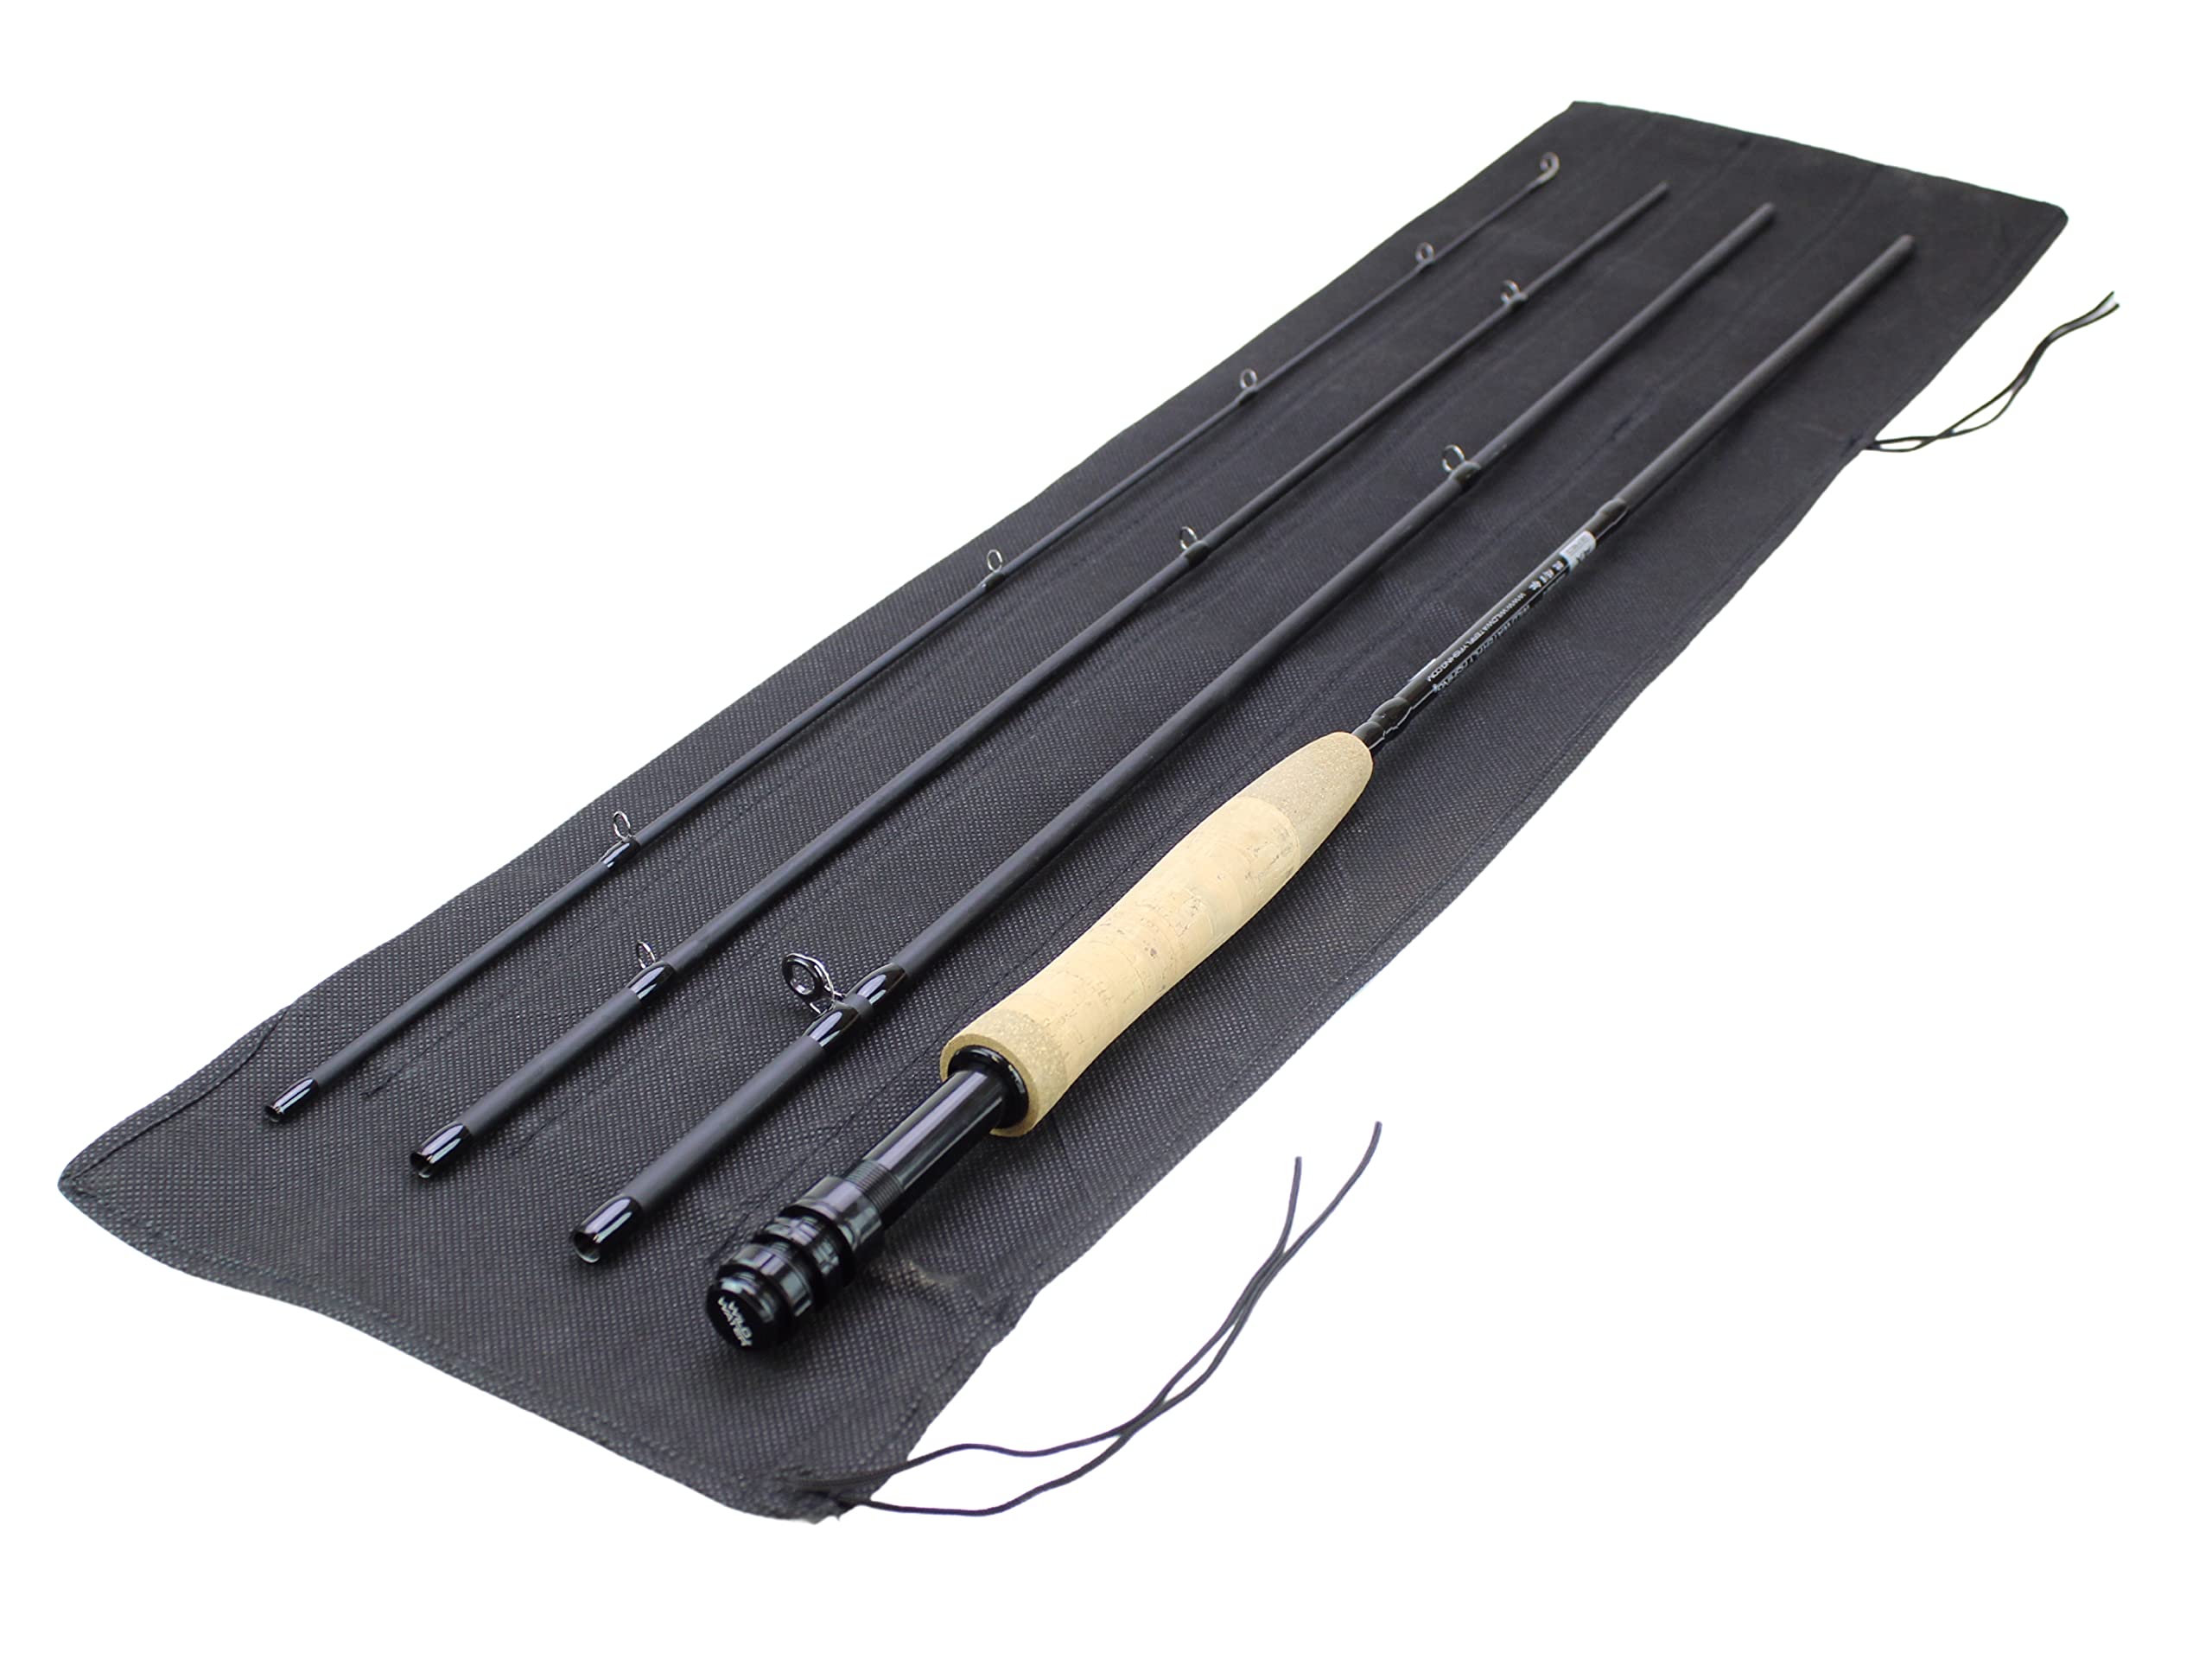 Wild Water Fly Fishing AX Series Fly Rod, IM8 Graphite Blank, 3/4/5/6/7/8/9/10/12 wt Rods, 56/7/8/9/10/11 ft